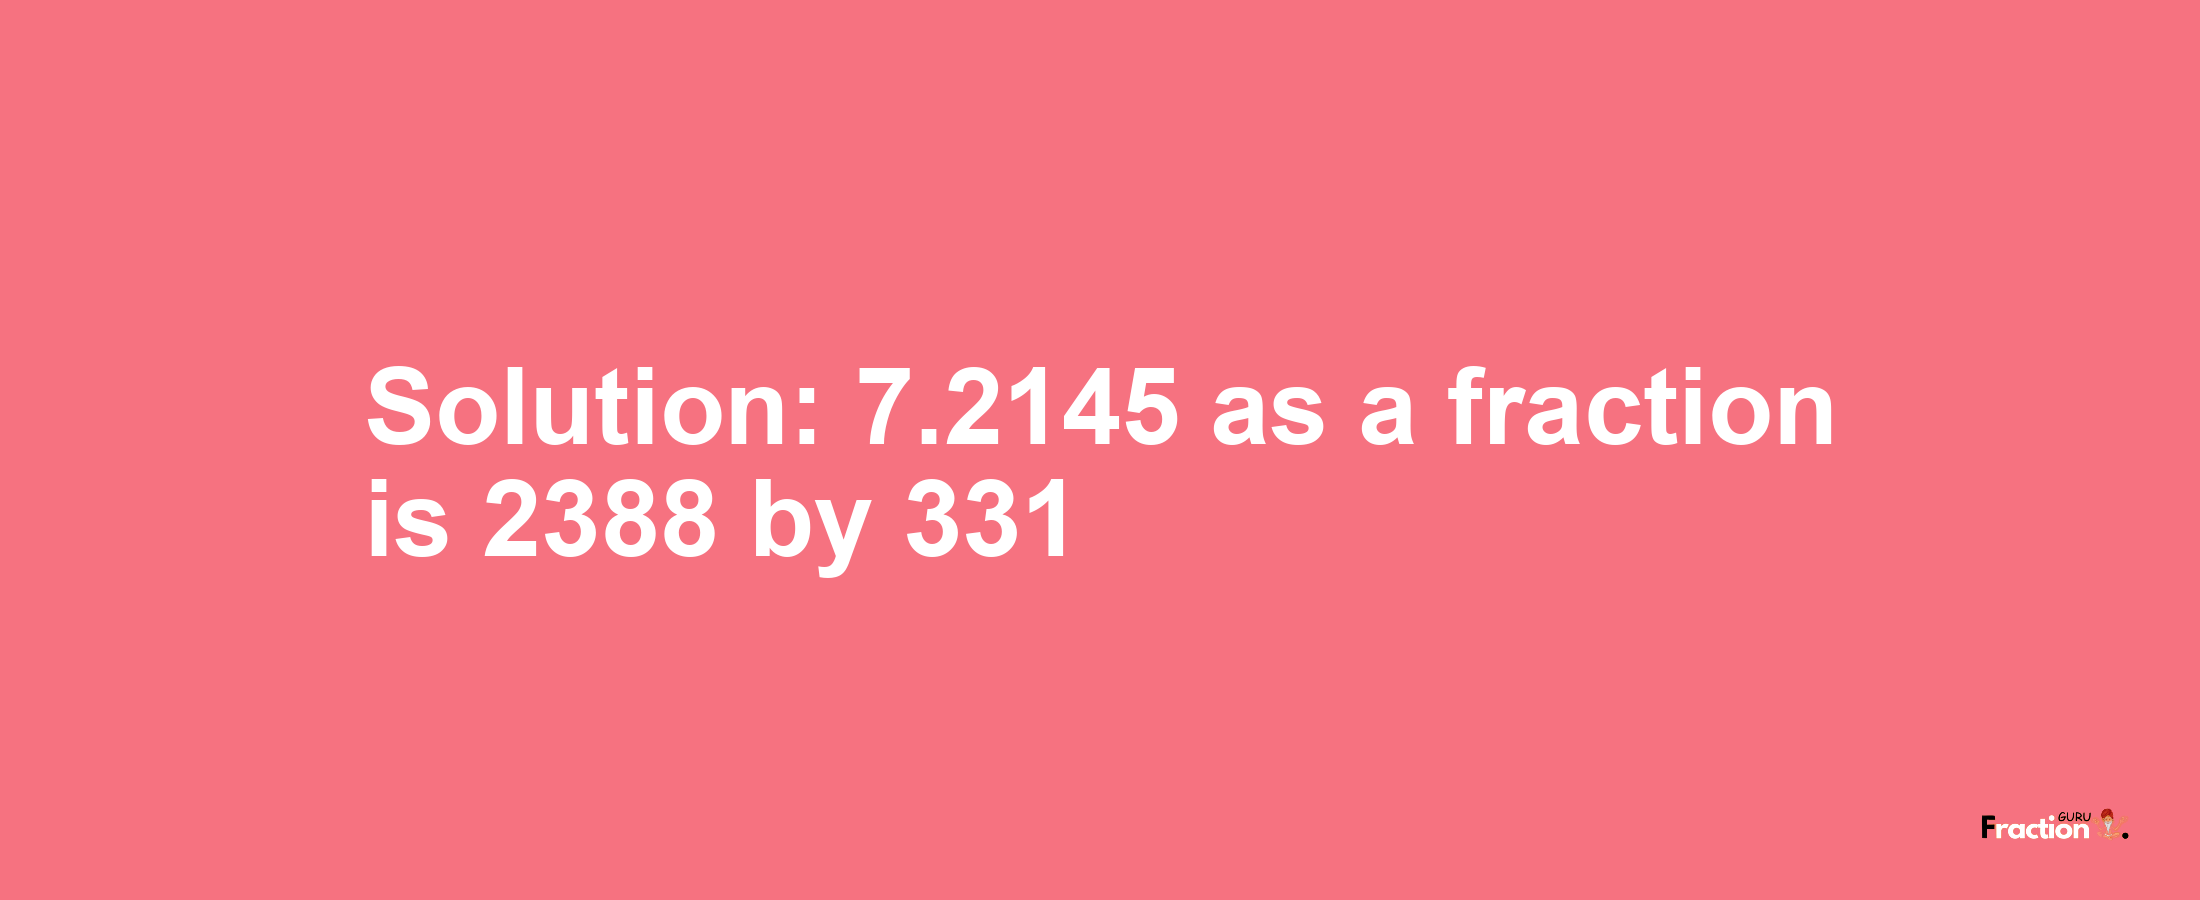 Solution:7.2145 as a fraction is 2388/331